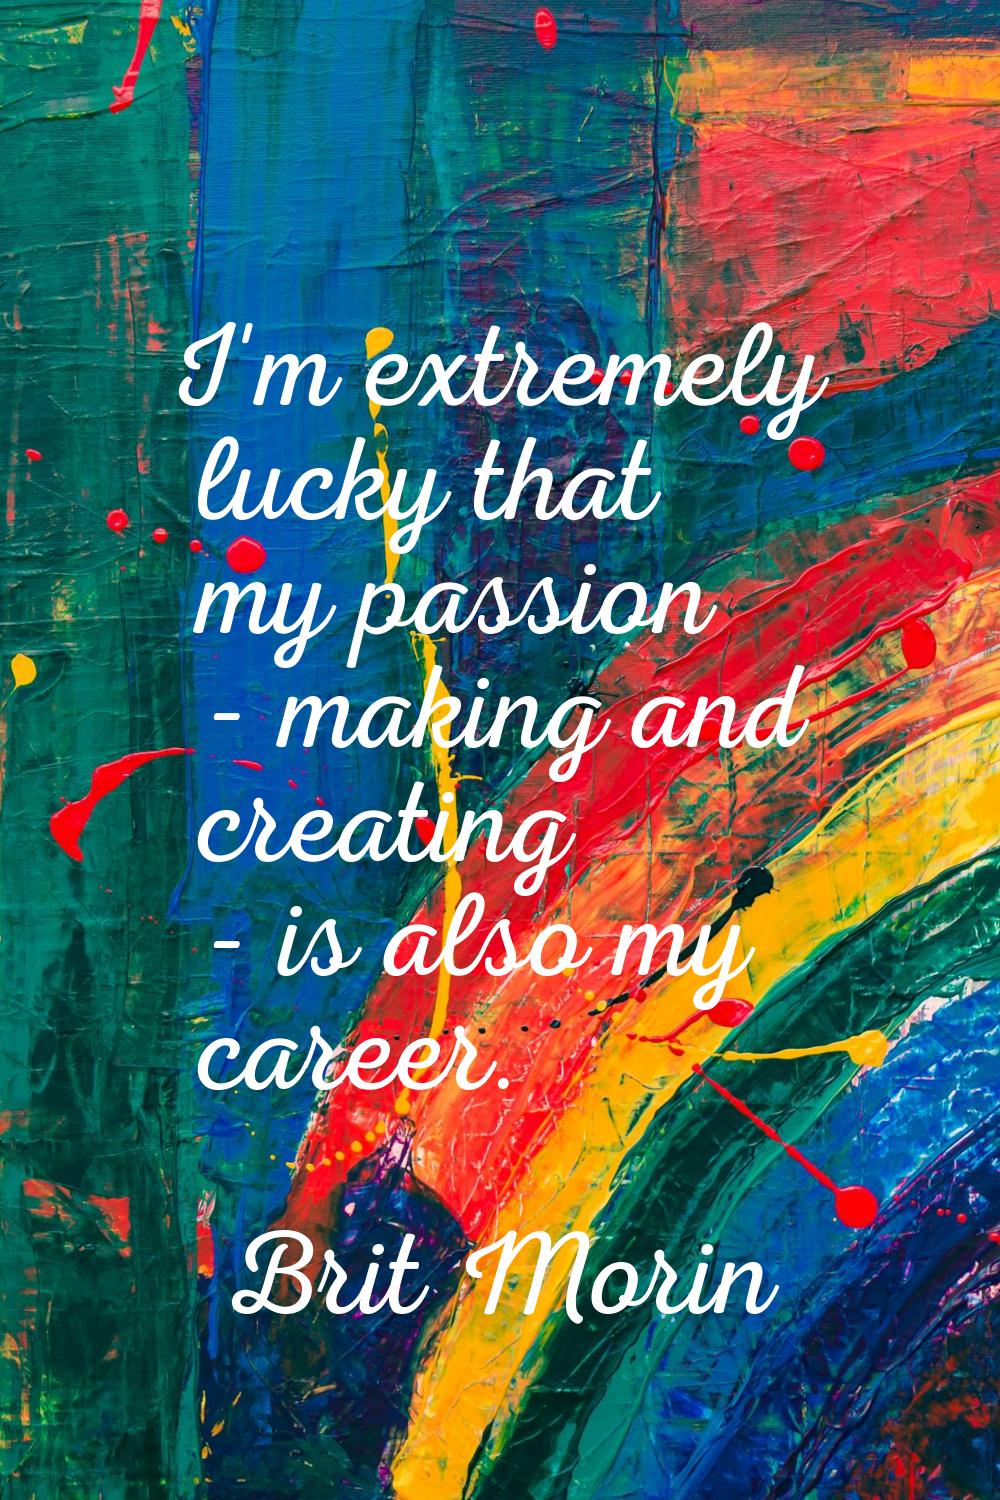 I'm extremely lucky that my passion - making and creating - is also my career.